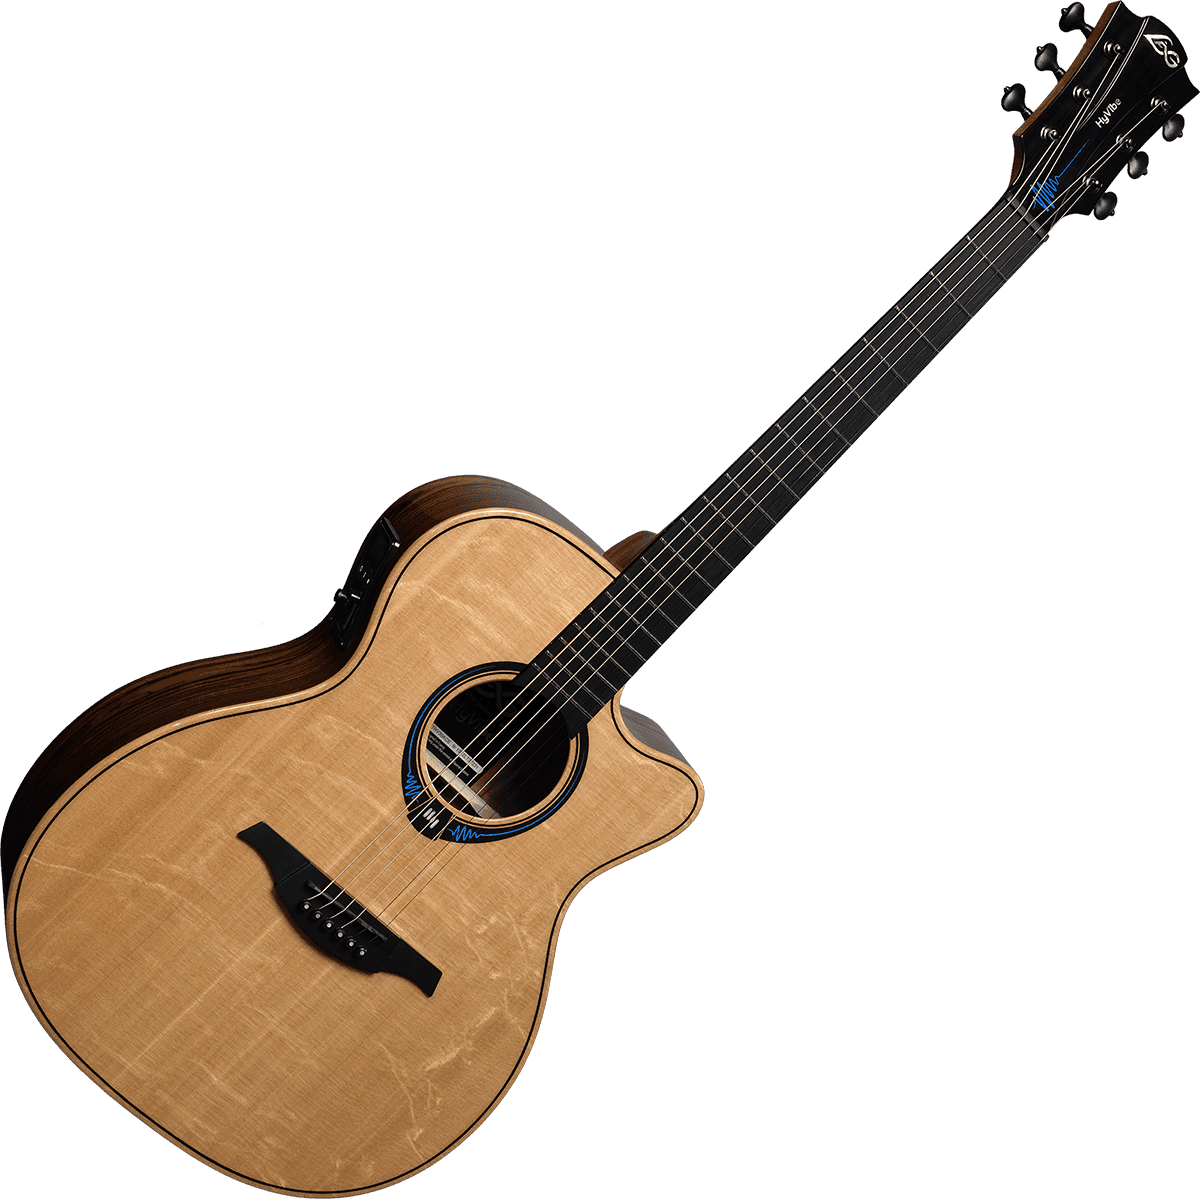 Lag HYVIBE 30 THV30ACE TRAMONTANE AUDITORIUM CUTAWAY, Electro Acoustic Guitar for sale at Richards Guitars.